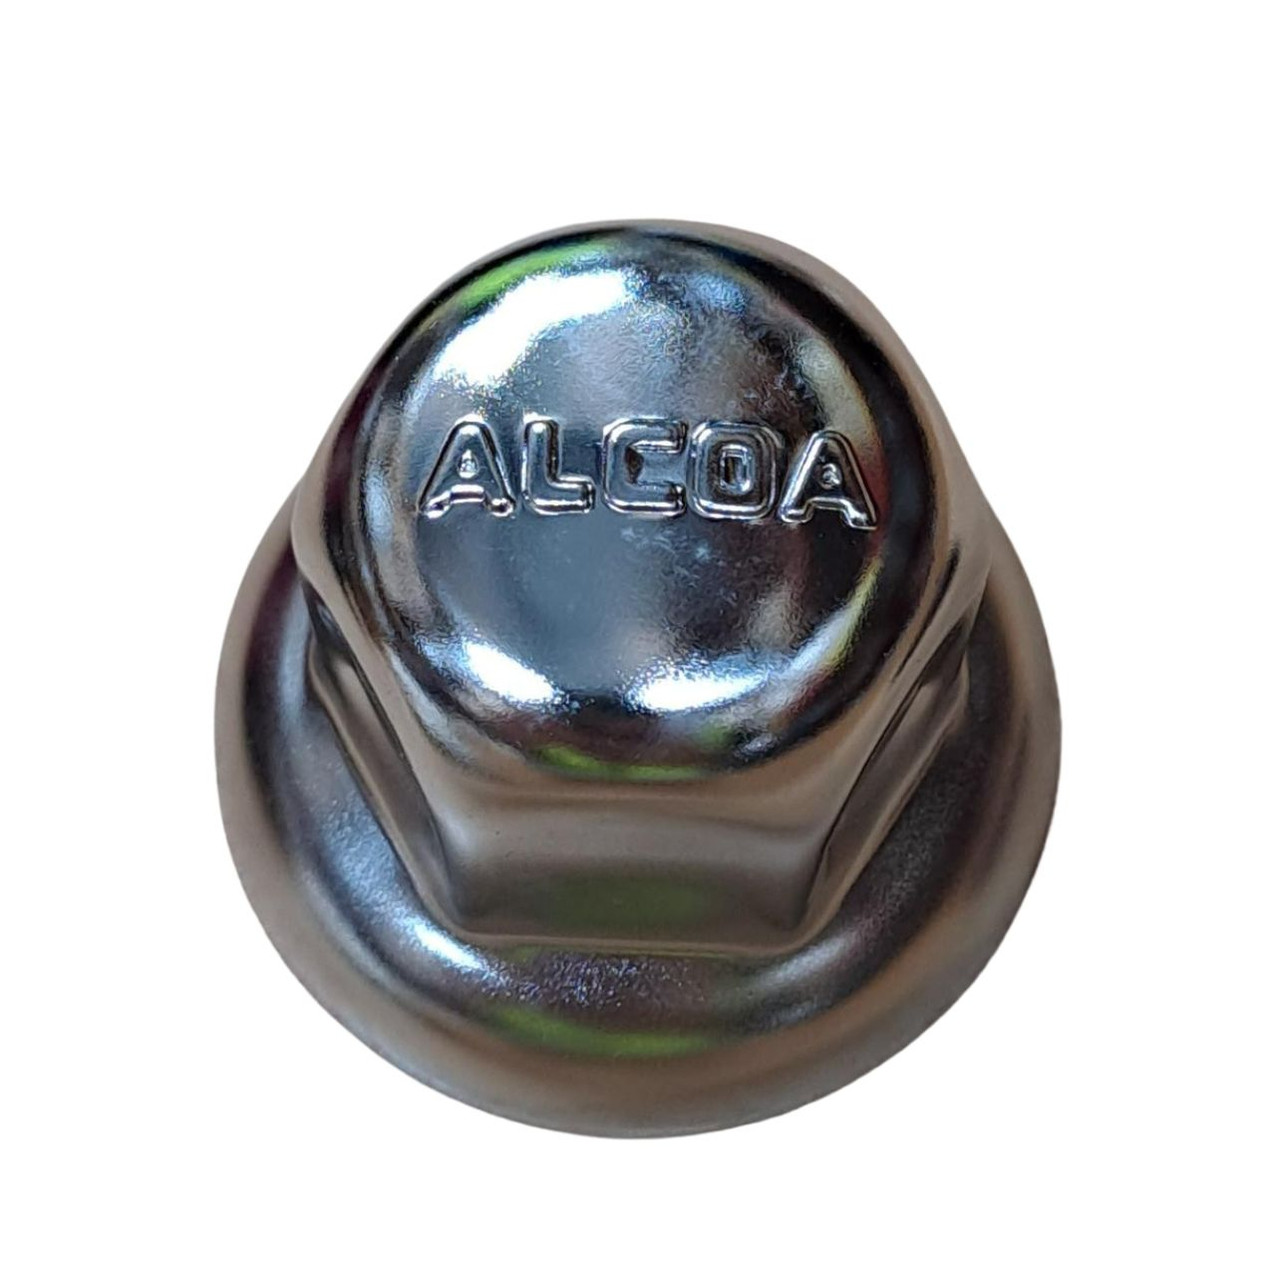 Wheel Nut Covers: Alcoa® Genuine Wheel Nut Covers - Stainless